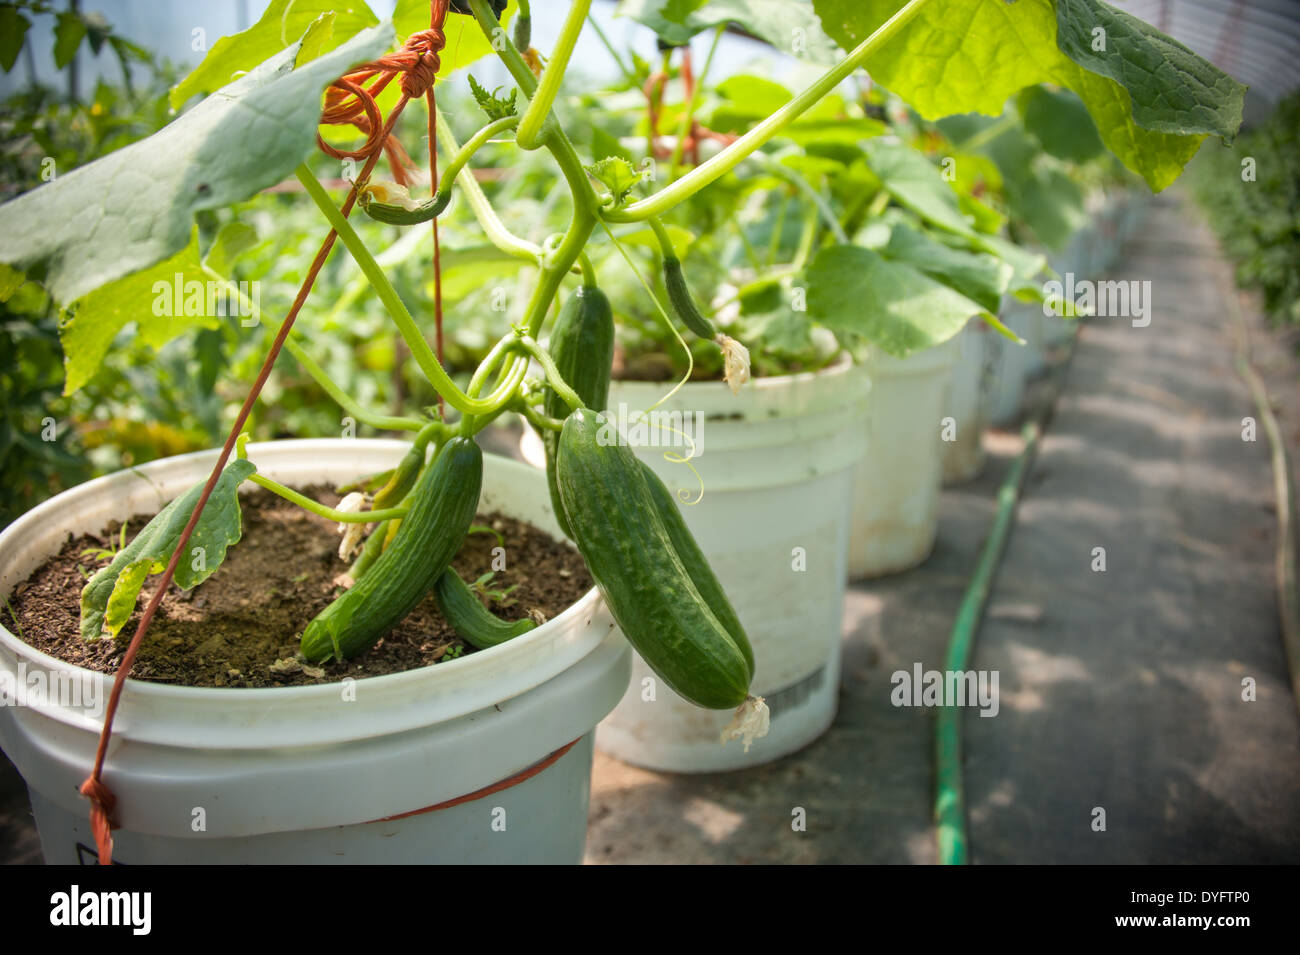 Cucumber Plants in Buckets Thurmont MD Stock Photo